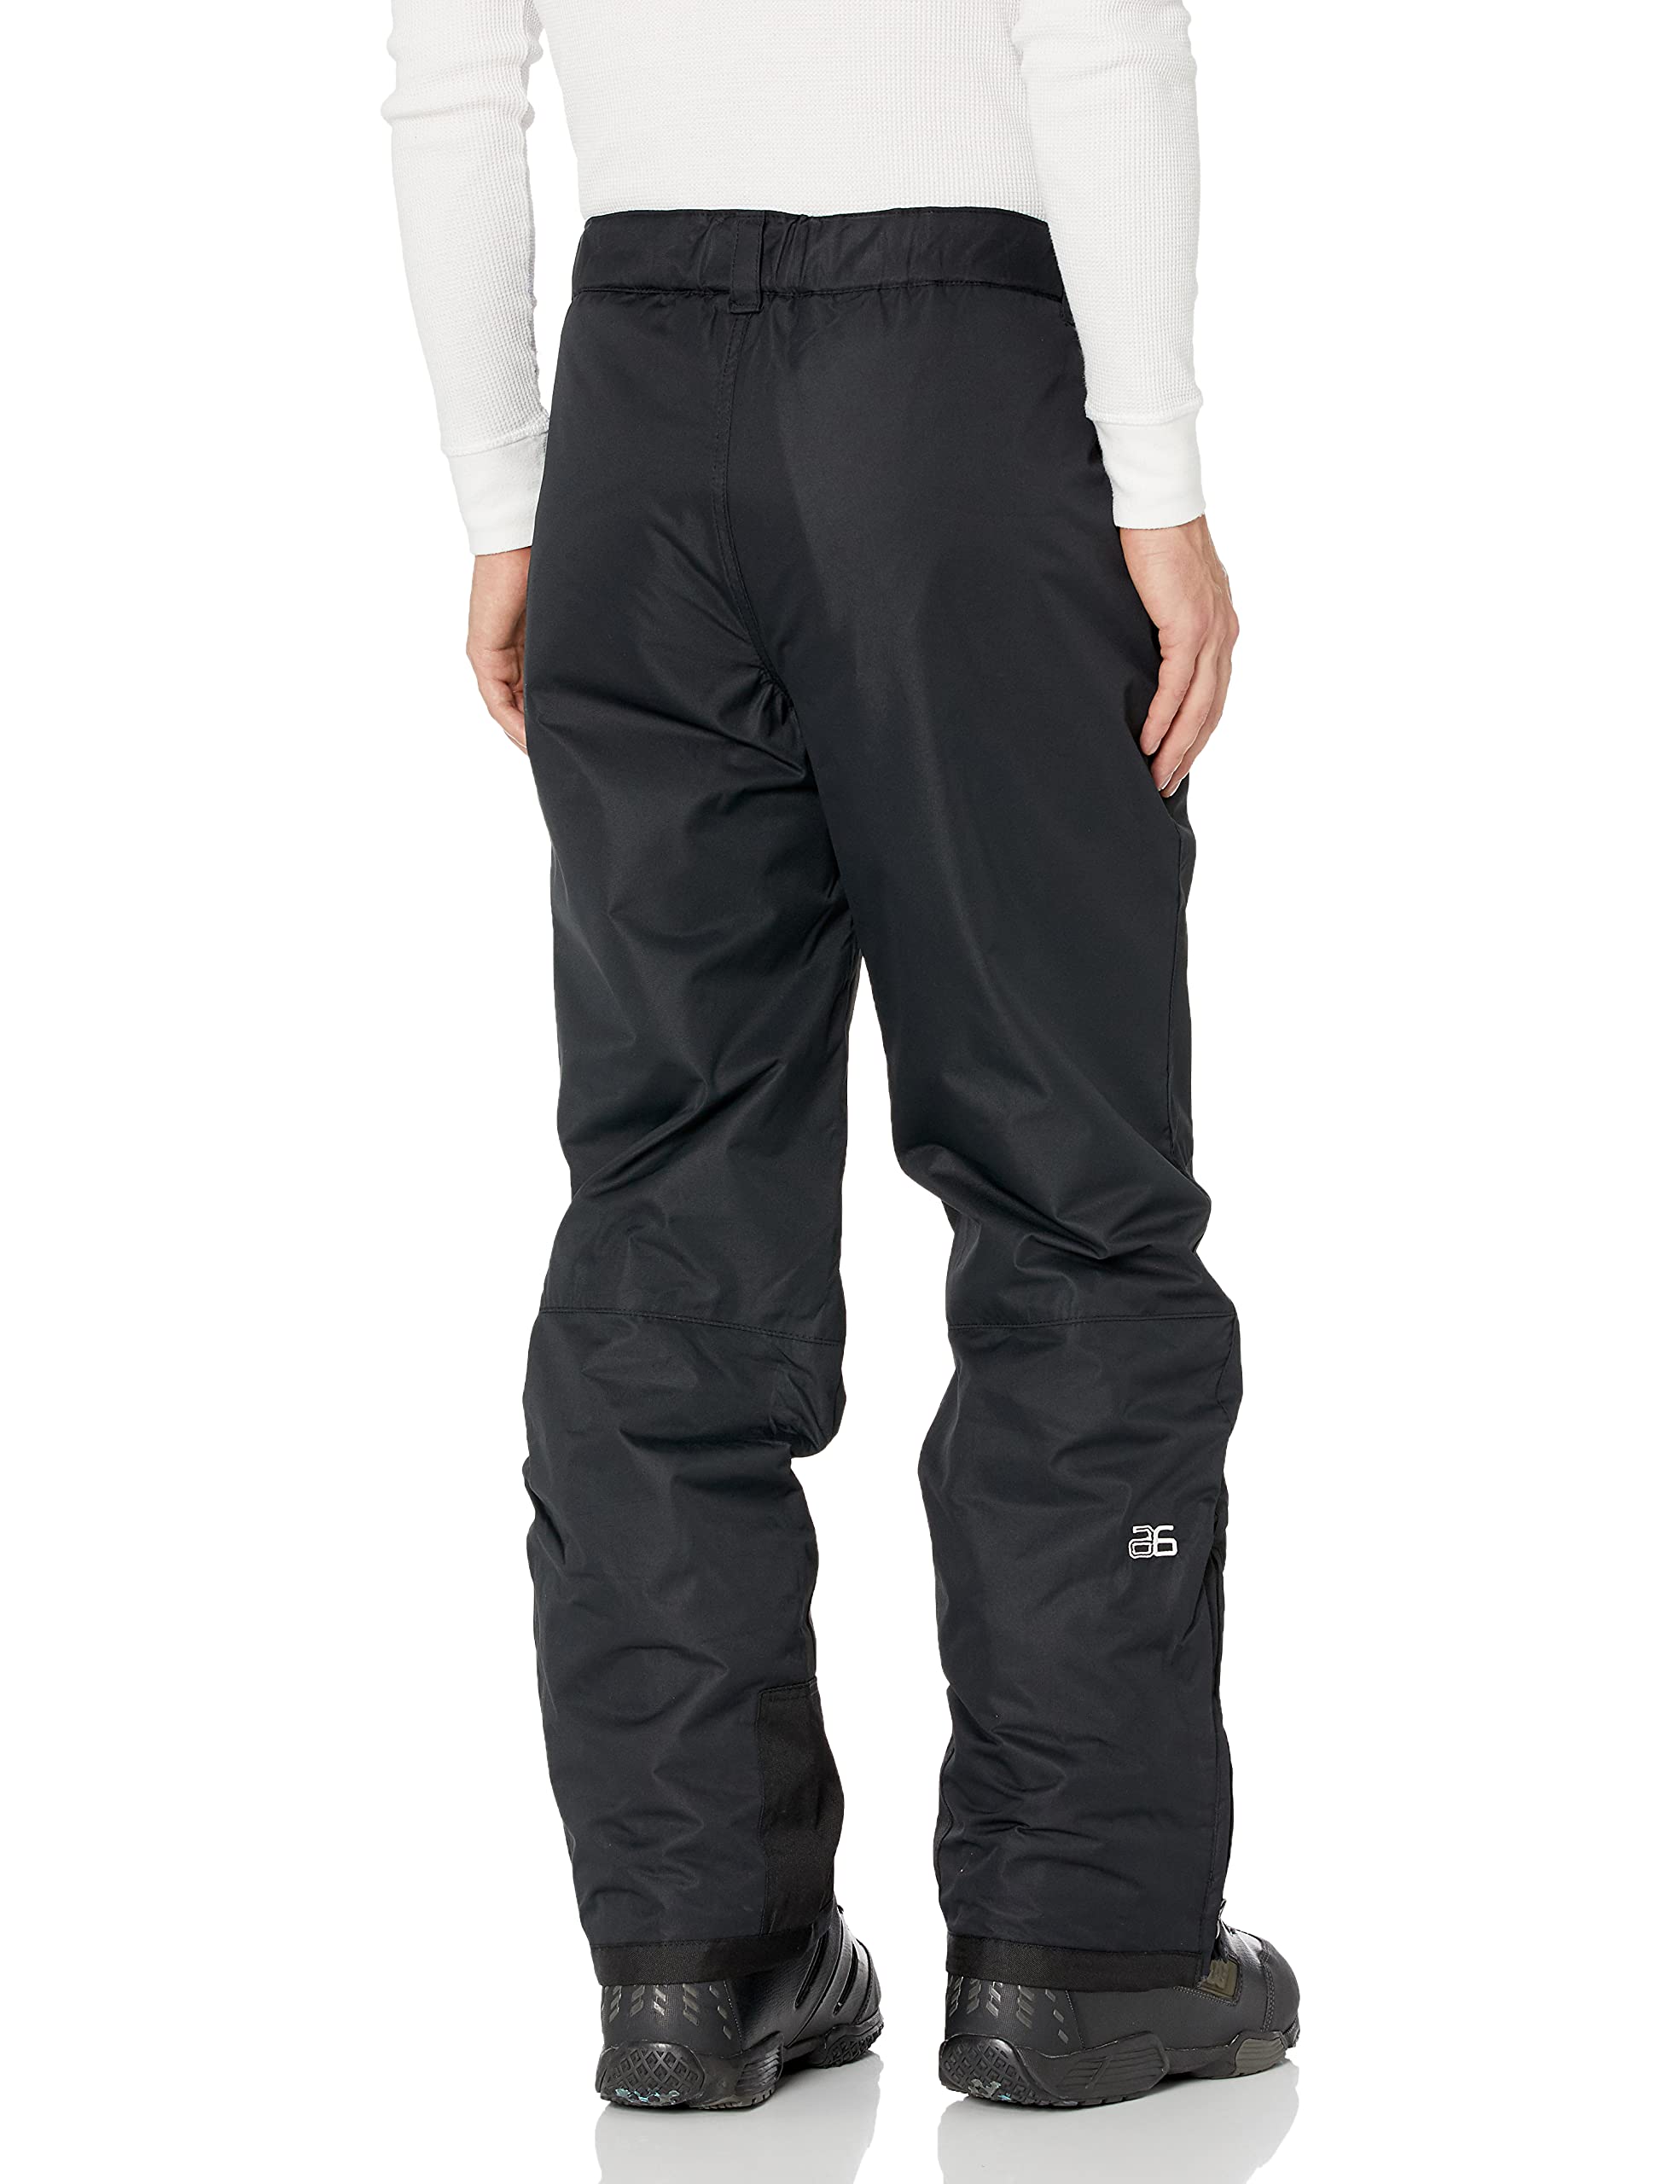 Arctix Women's Snow Sports Insulated Cargo Black Pants Size X-Large -  clothing & accessories - by owner - apparel sale